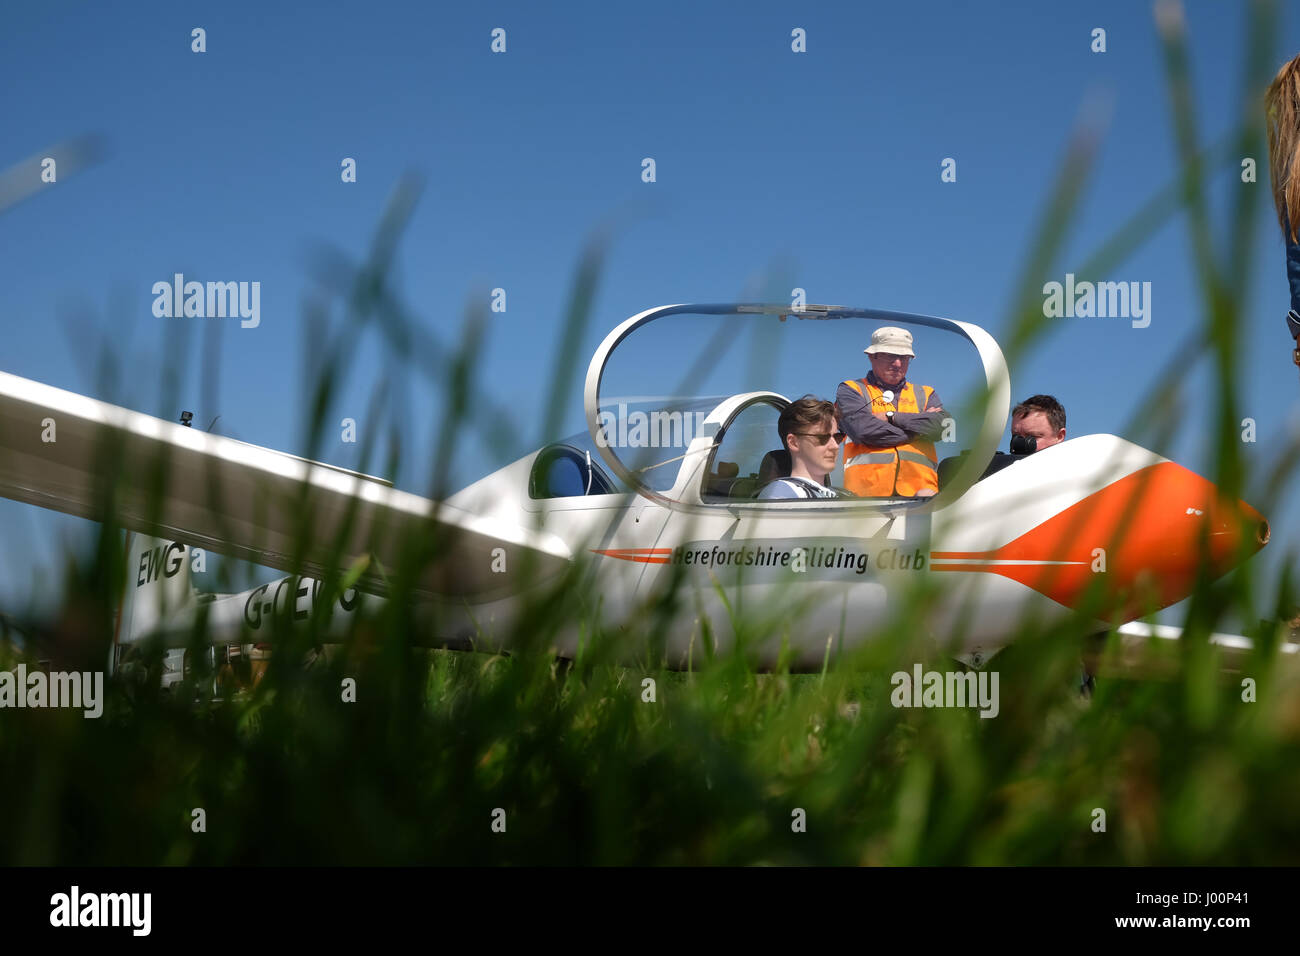 Shobdon airfield, Herefordshire, UK - April 2017 - Perfect warm sunny day at Shobdon airfield with clear blue skies great for the Herefordshire Gliding Club. Stock Photo